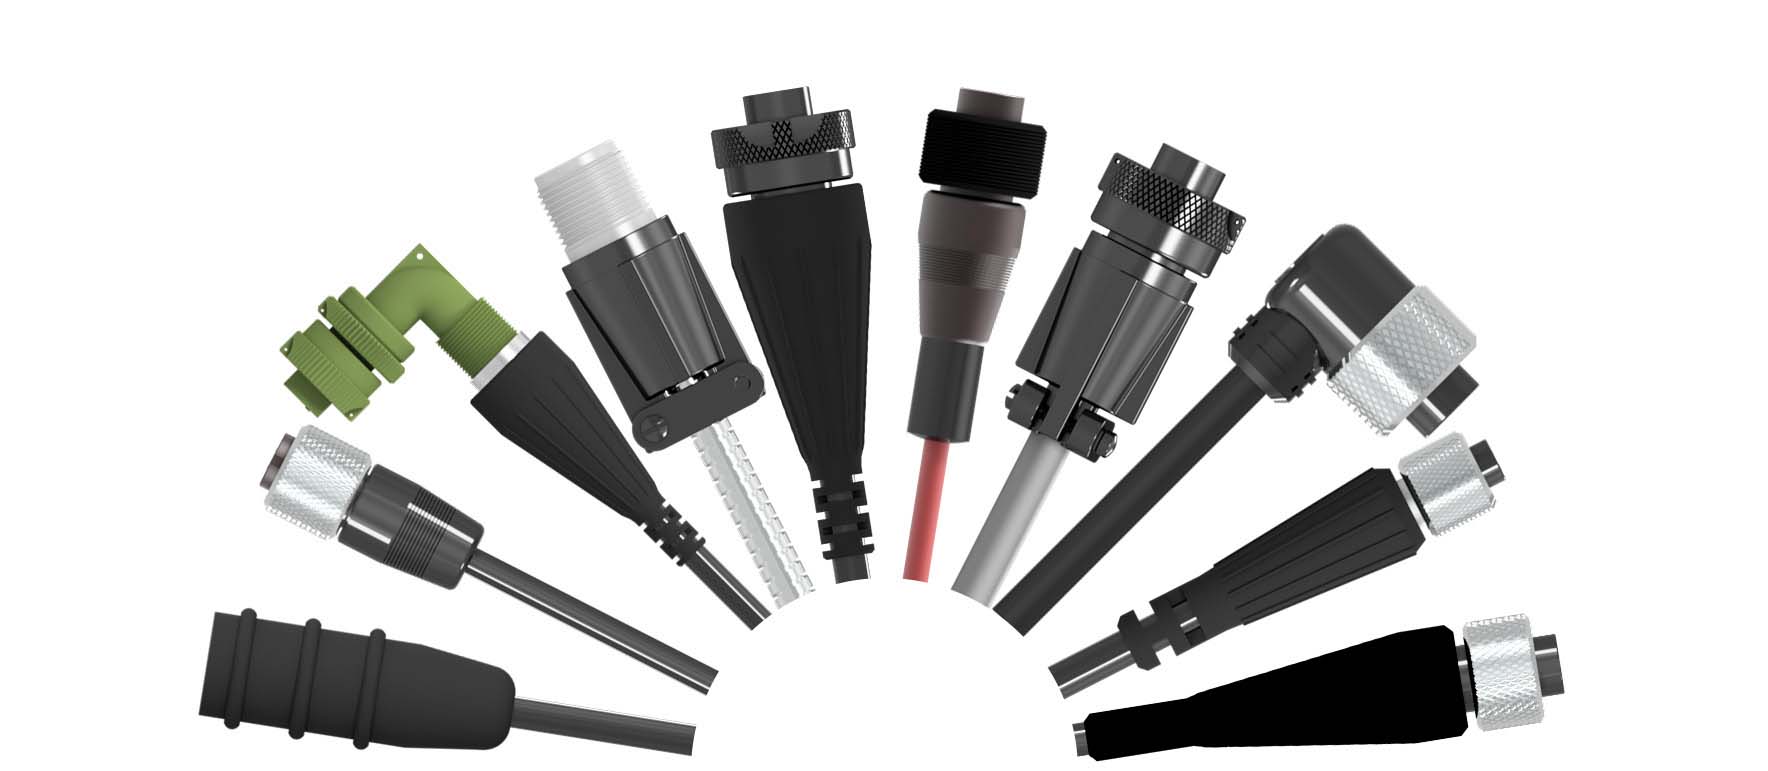 A variety of CTC connectors in a half-circle shape.